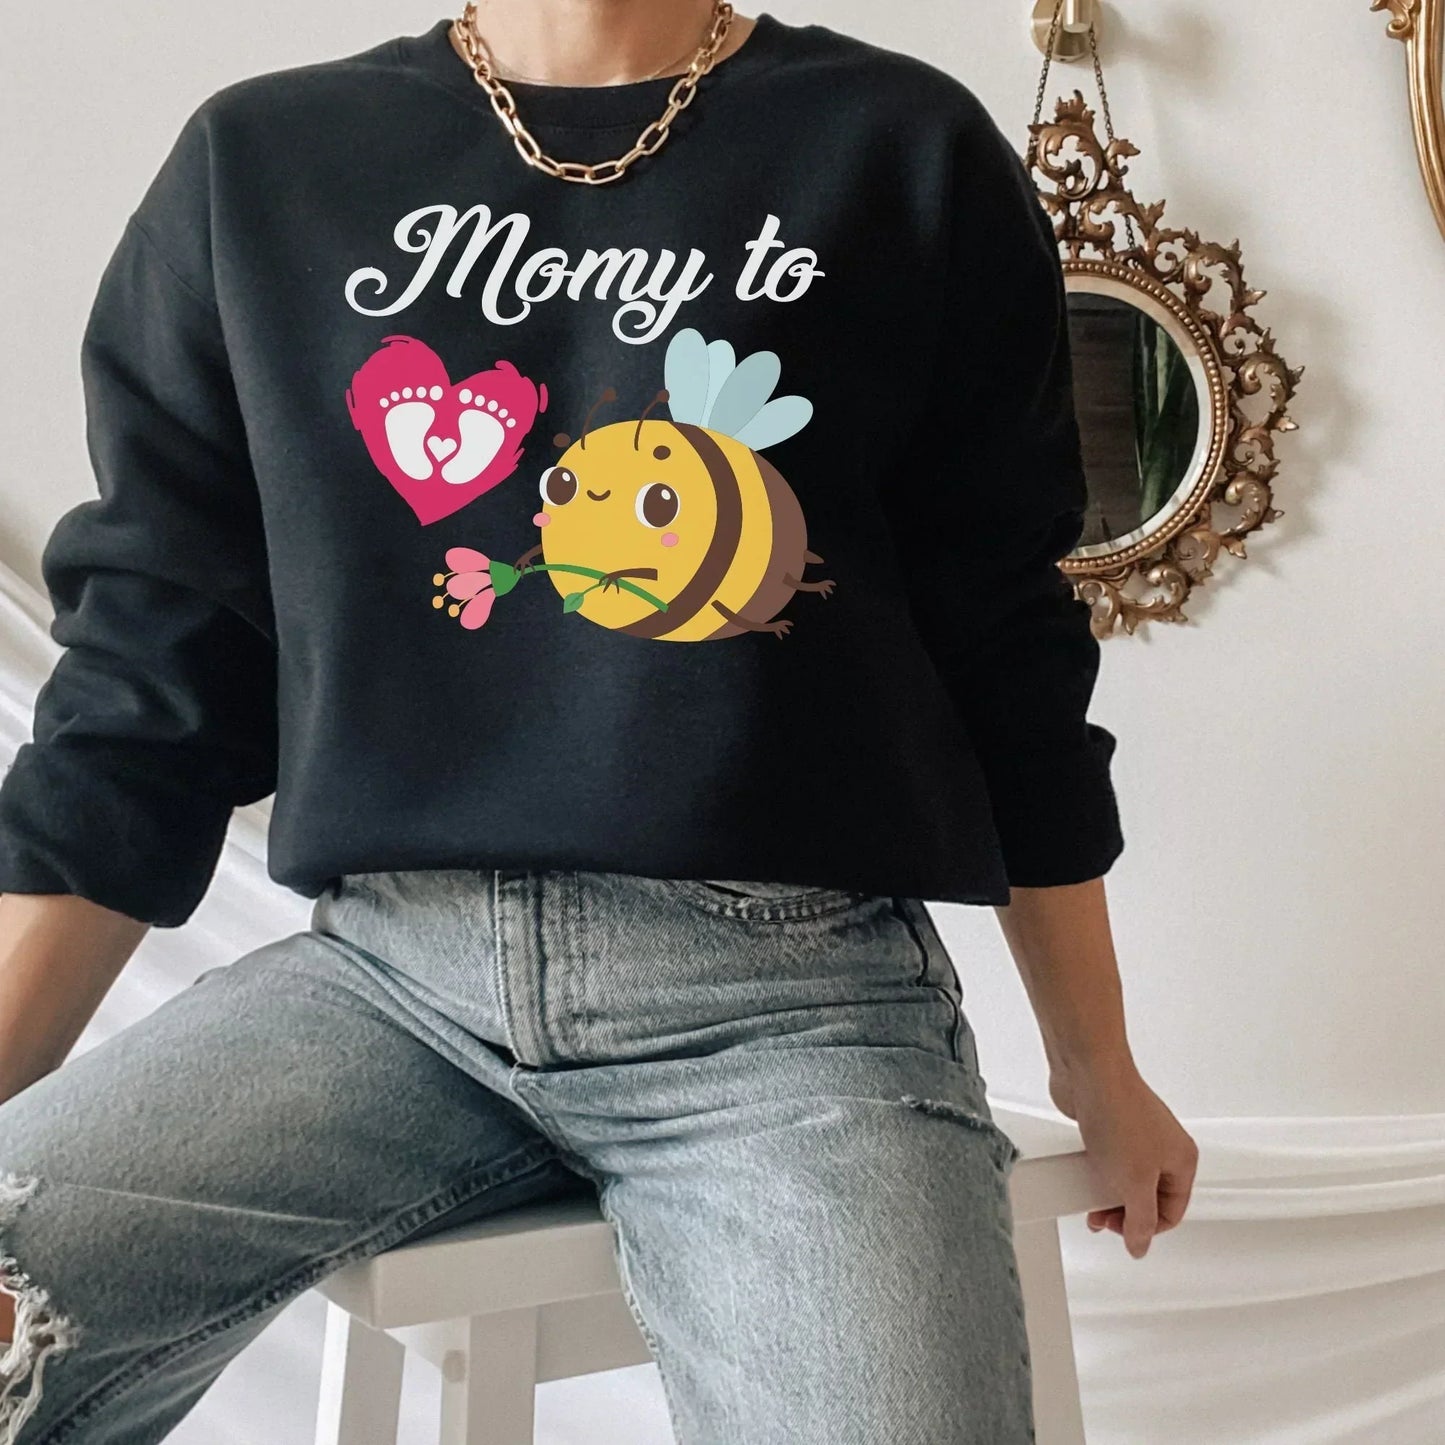 Pregnancy sweatshirt, Maternity shirt, Bumble Bee Pregnancy Reveal to Husband, Soon to Be Mom, Expecting Mother Hoodie, New Baby Coming Soon HMDesignStudioUS